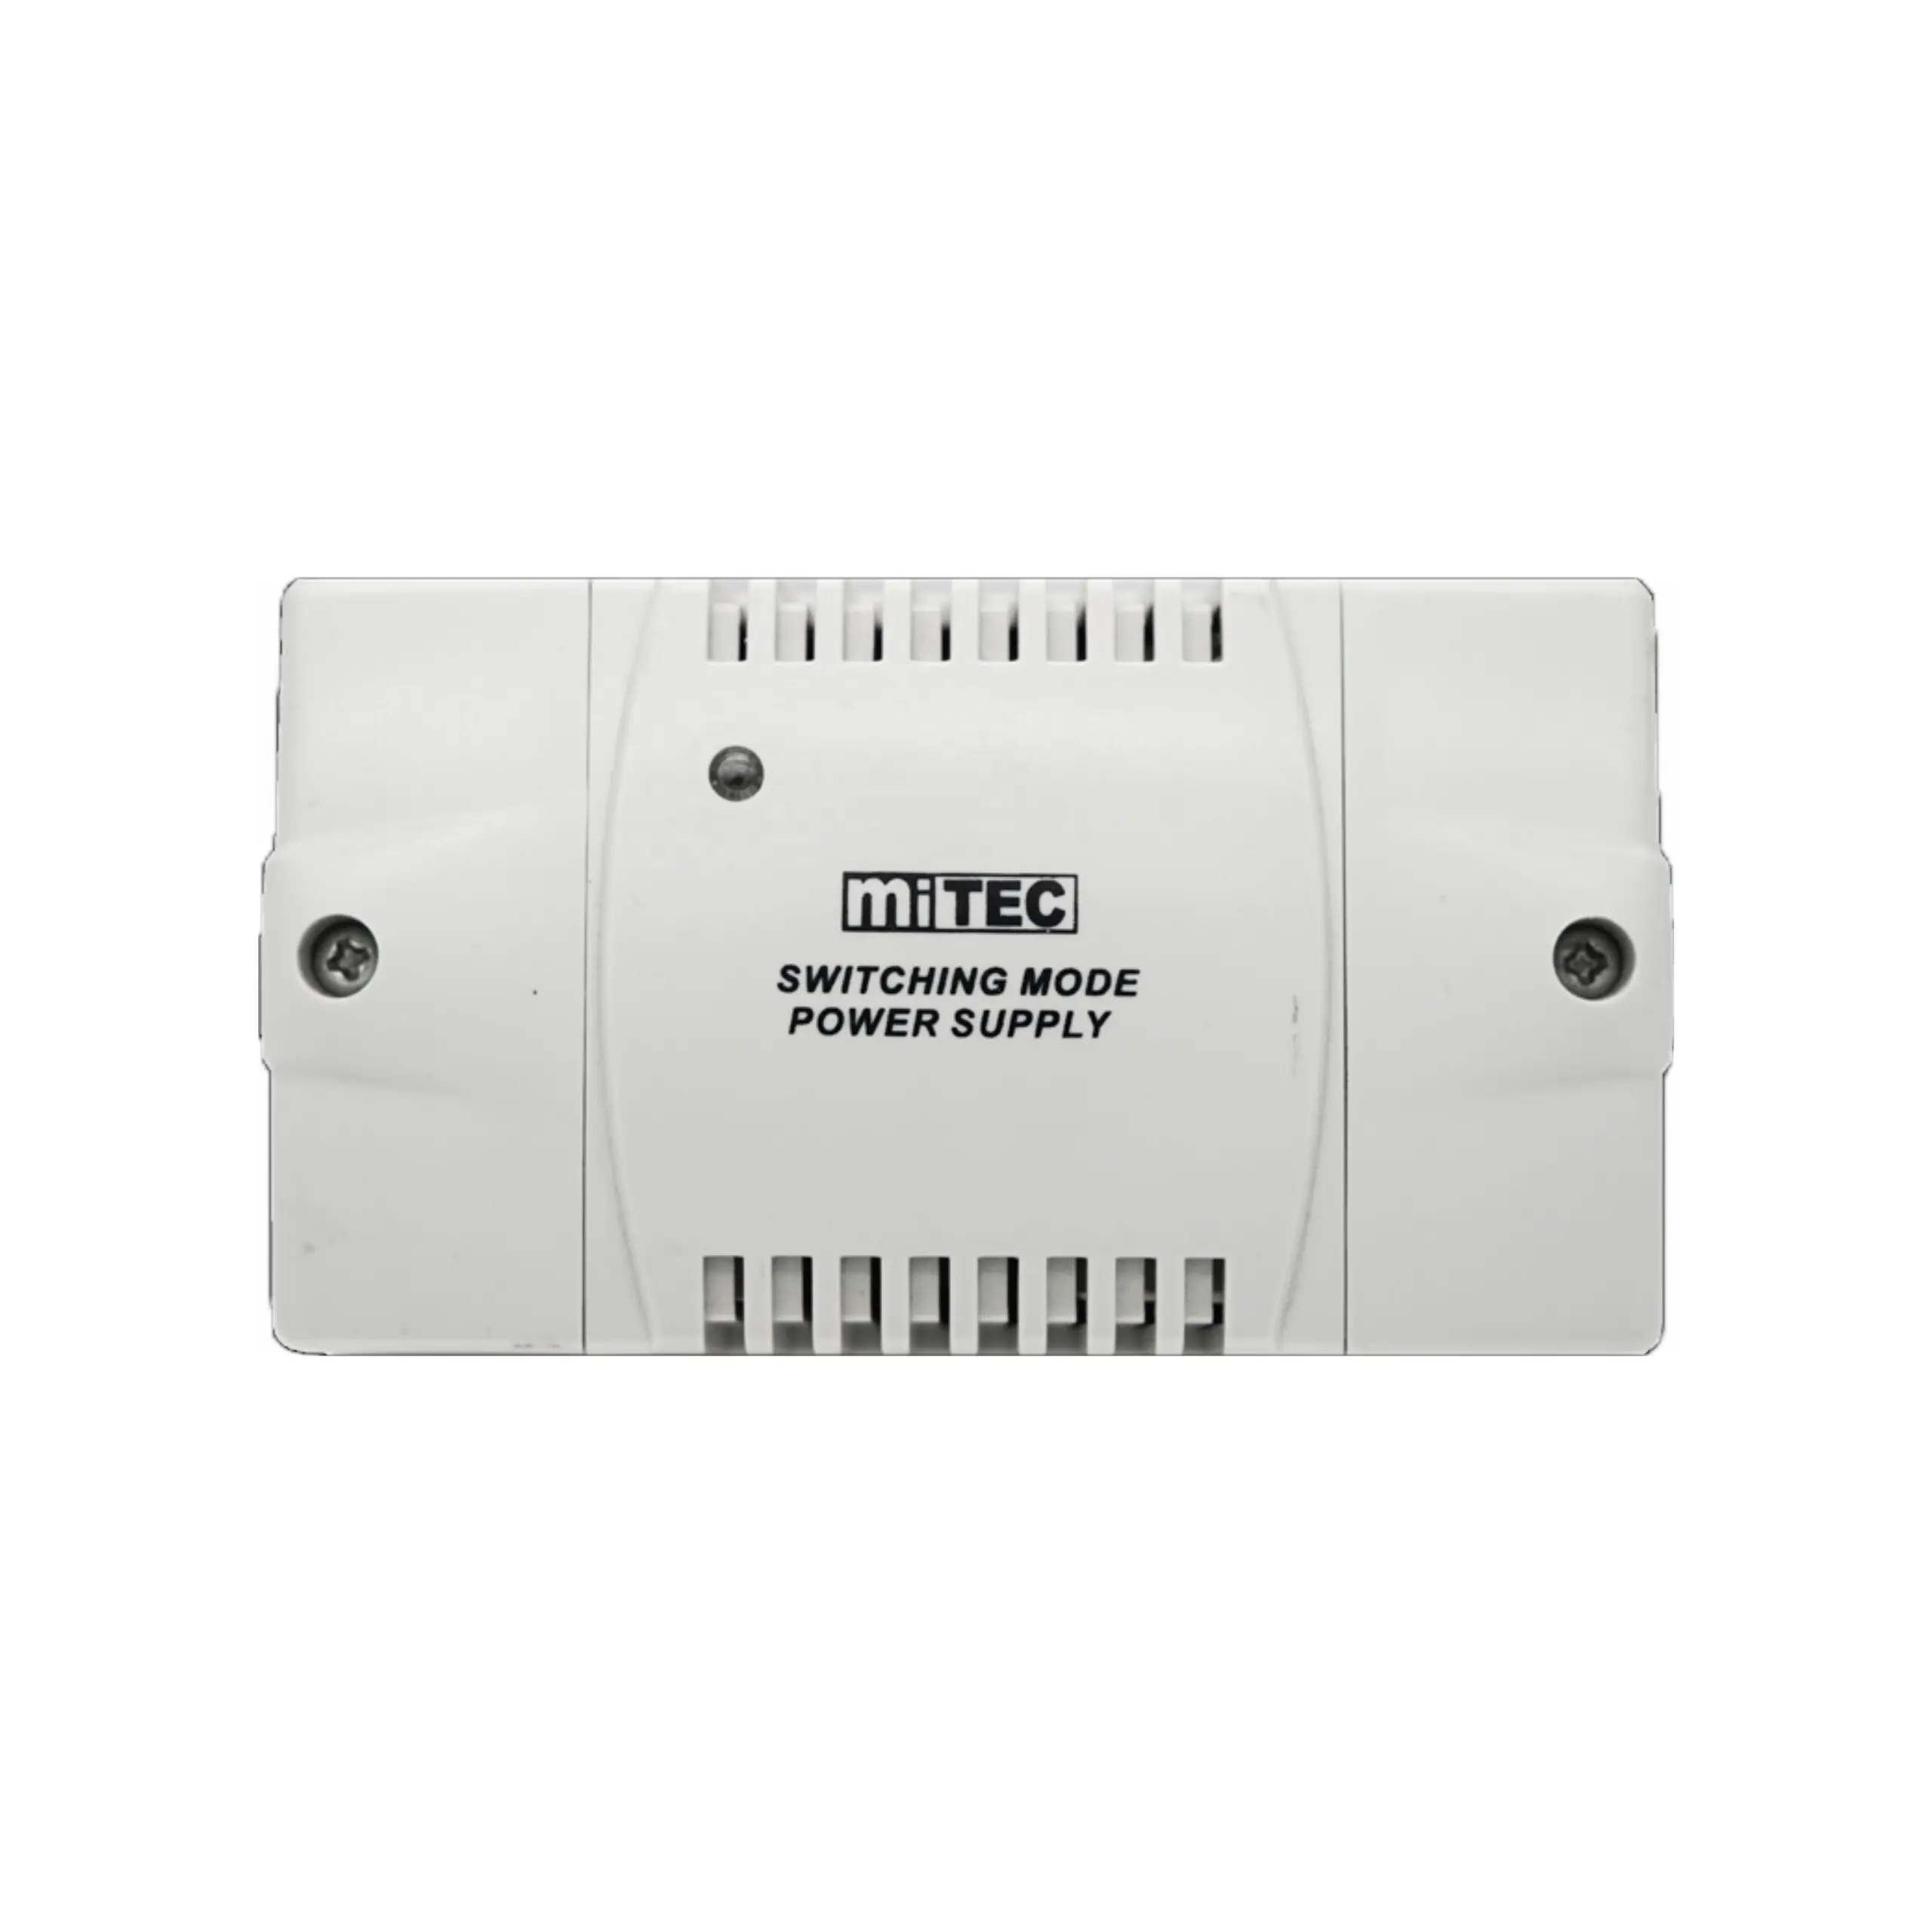 miTEC 12VDC Access Control Switching Power Supply 2.5A with Adjustable Time Delay for Electric Lock